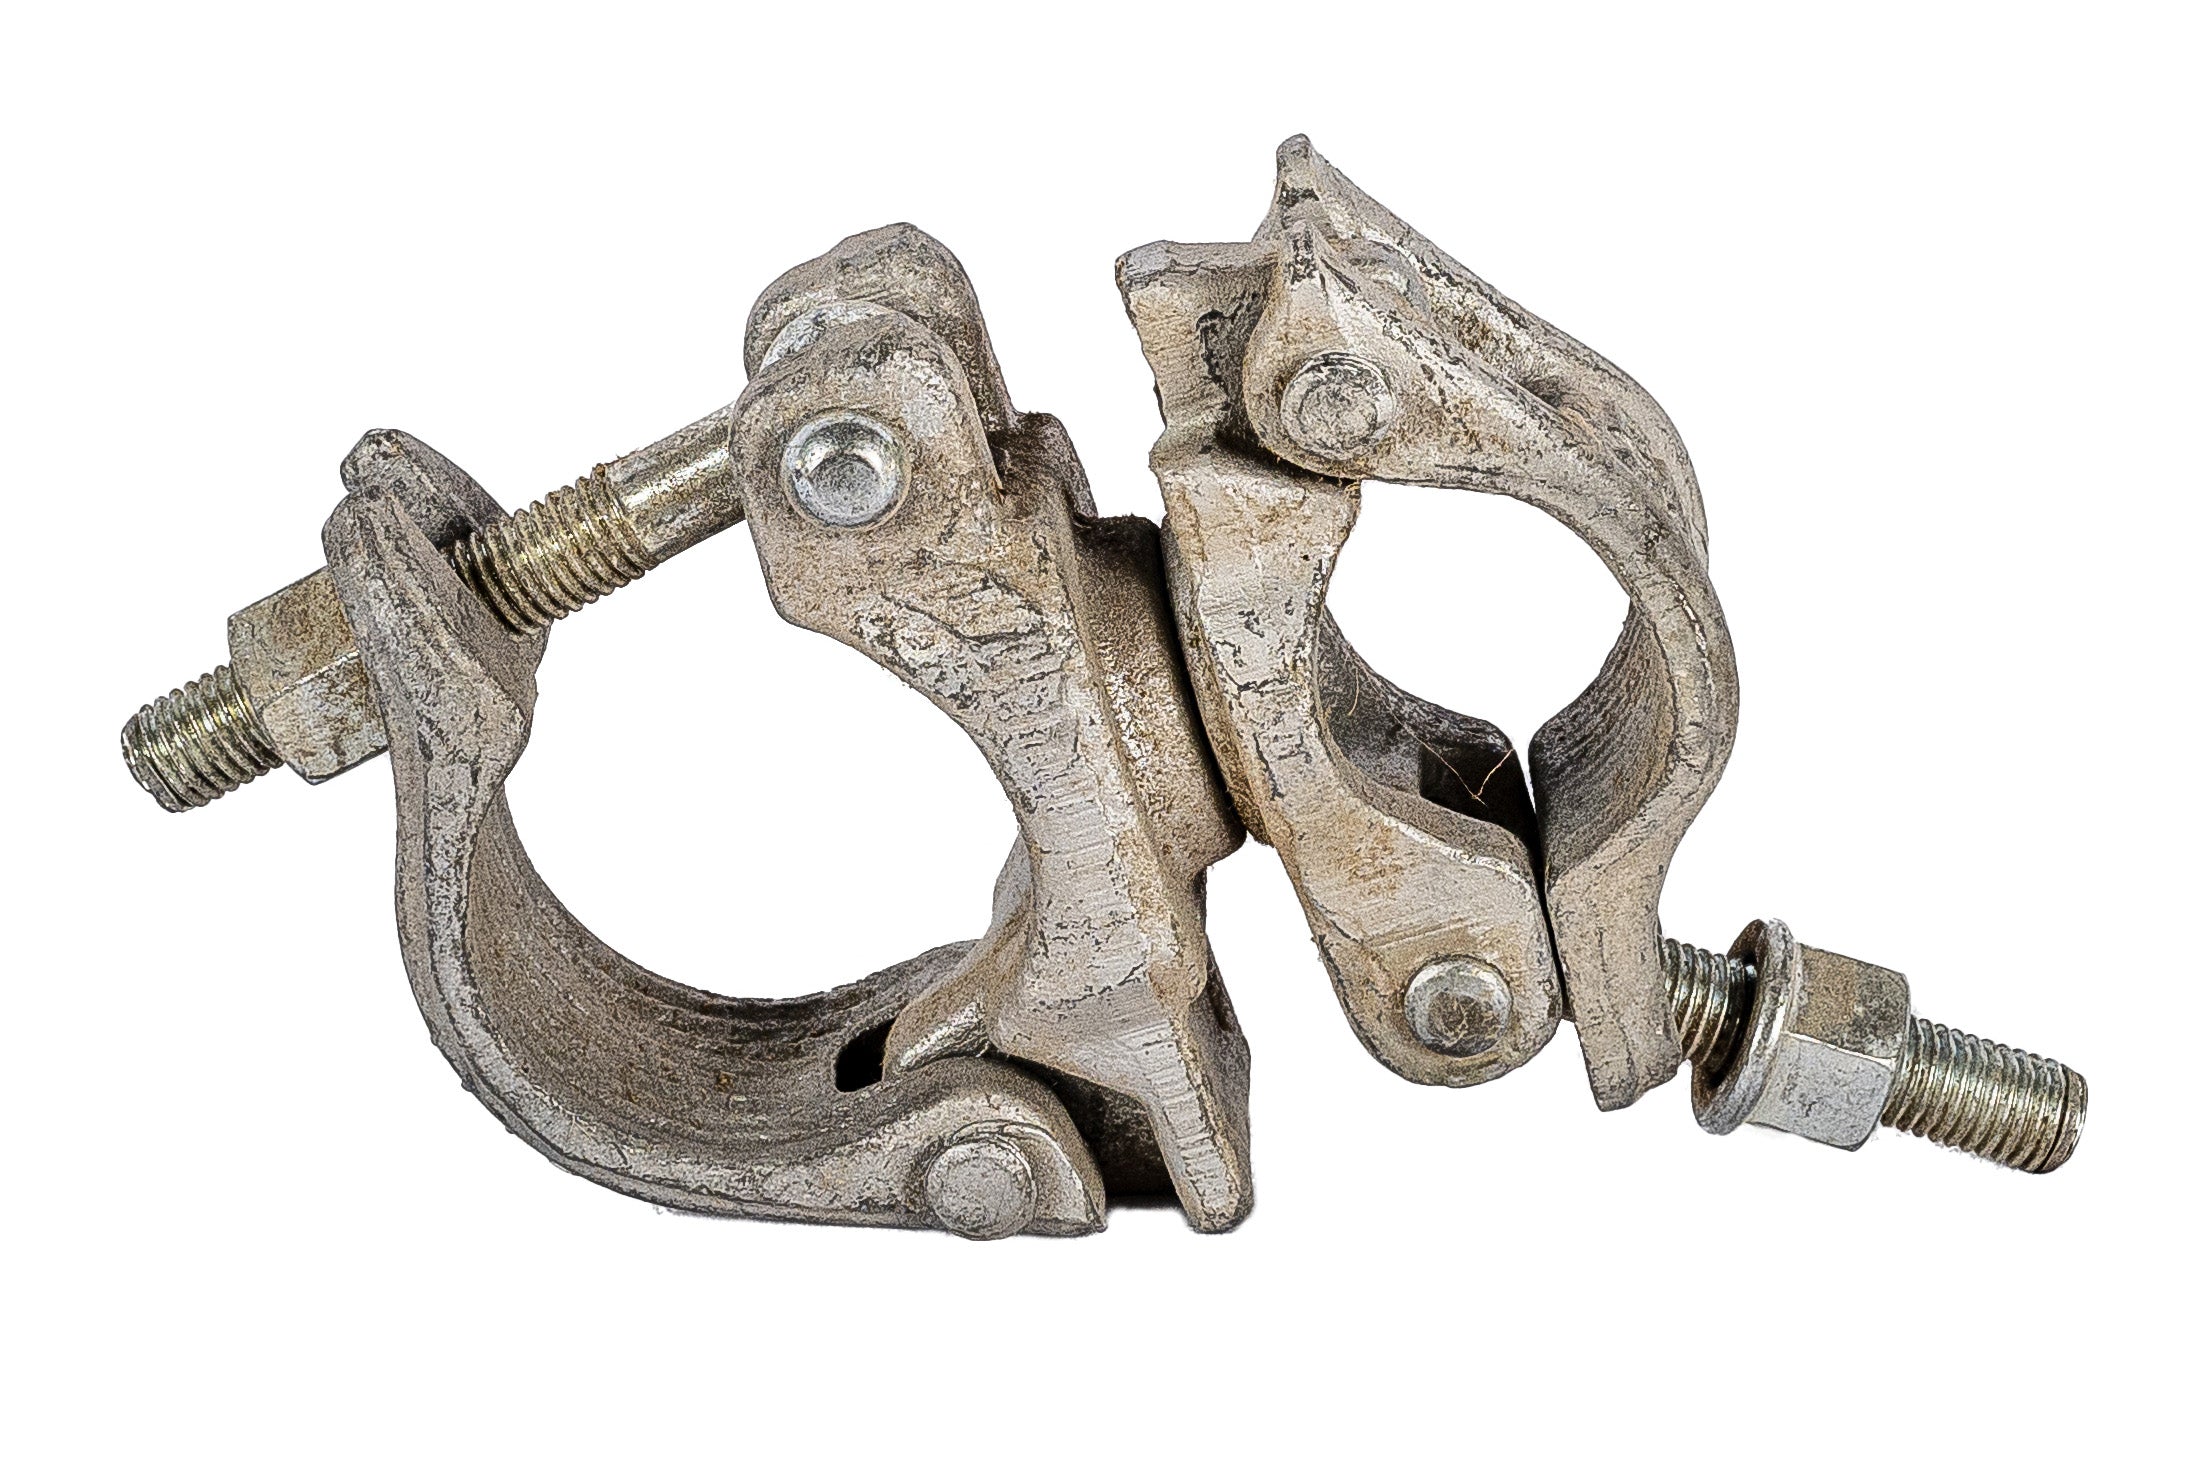 Buy Now the 2.5 x 2 Swivel I-Bolt Scaffold Clamp –